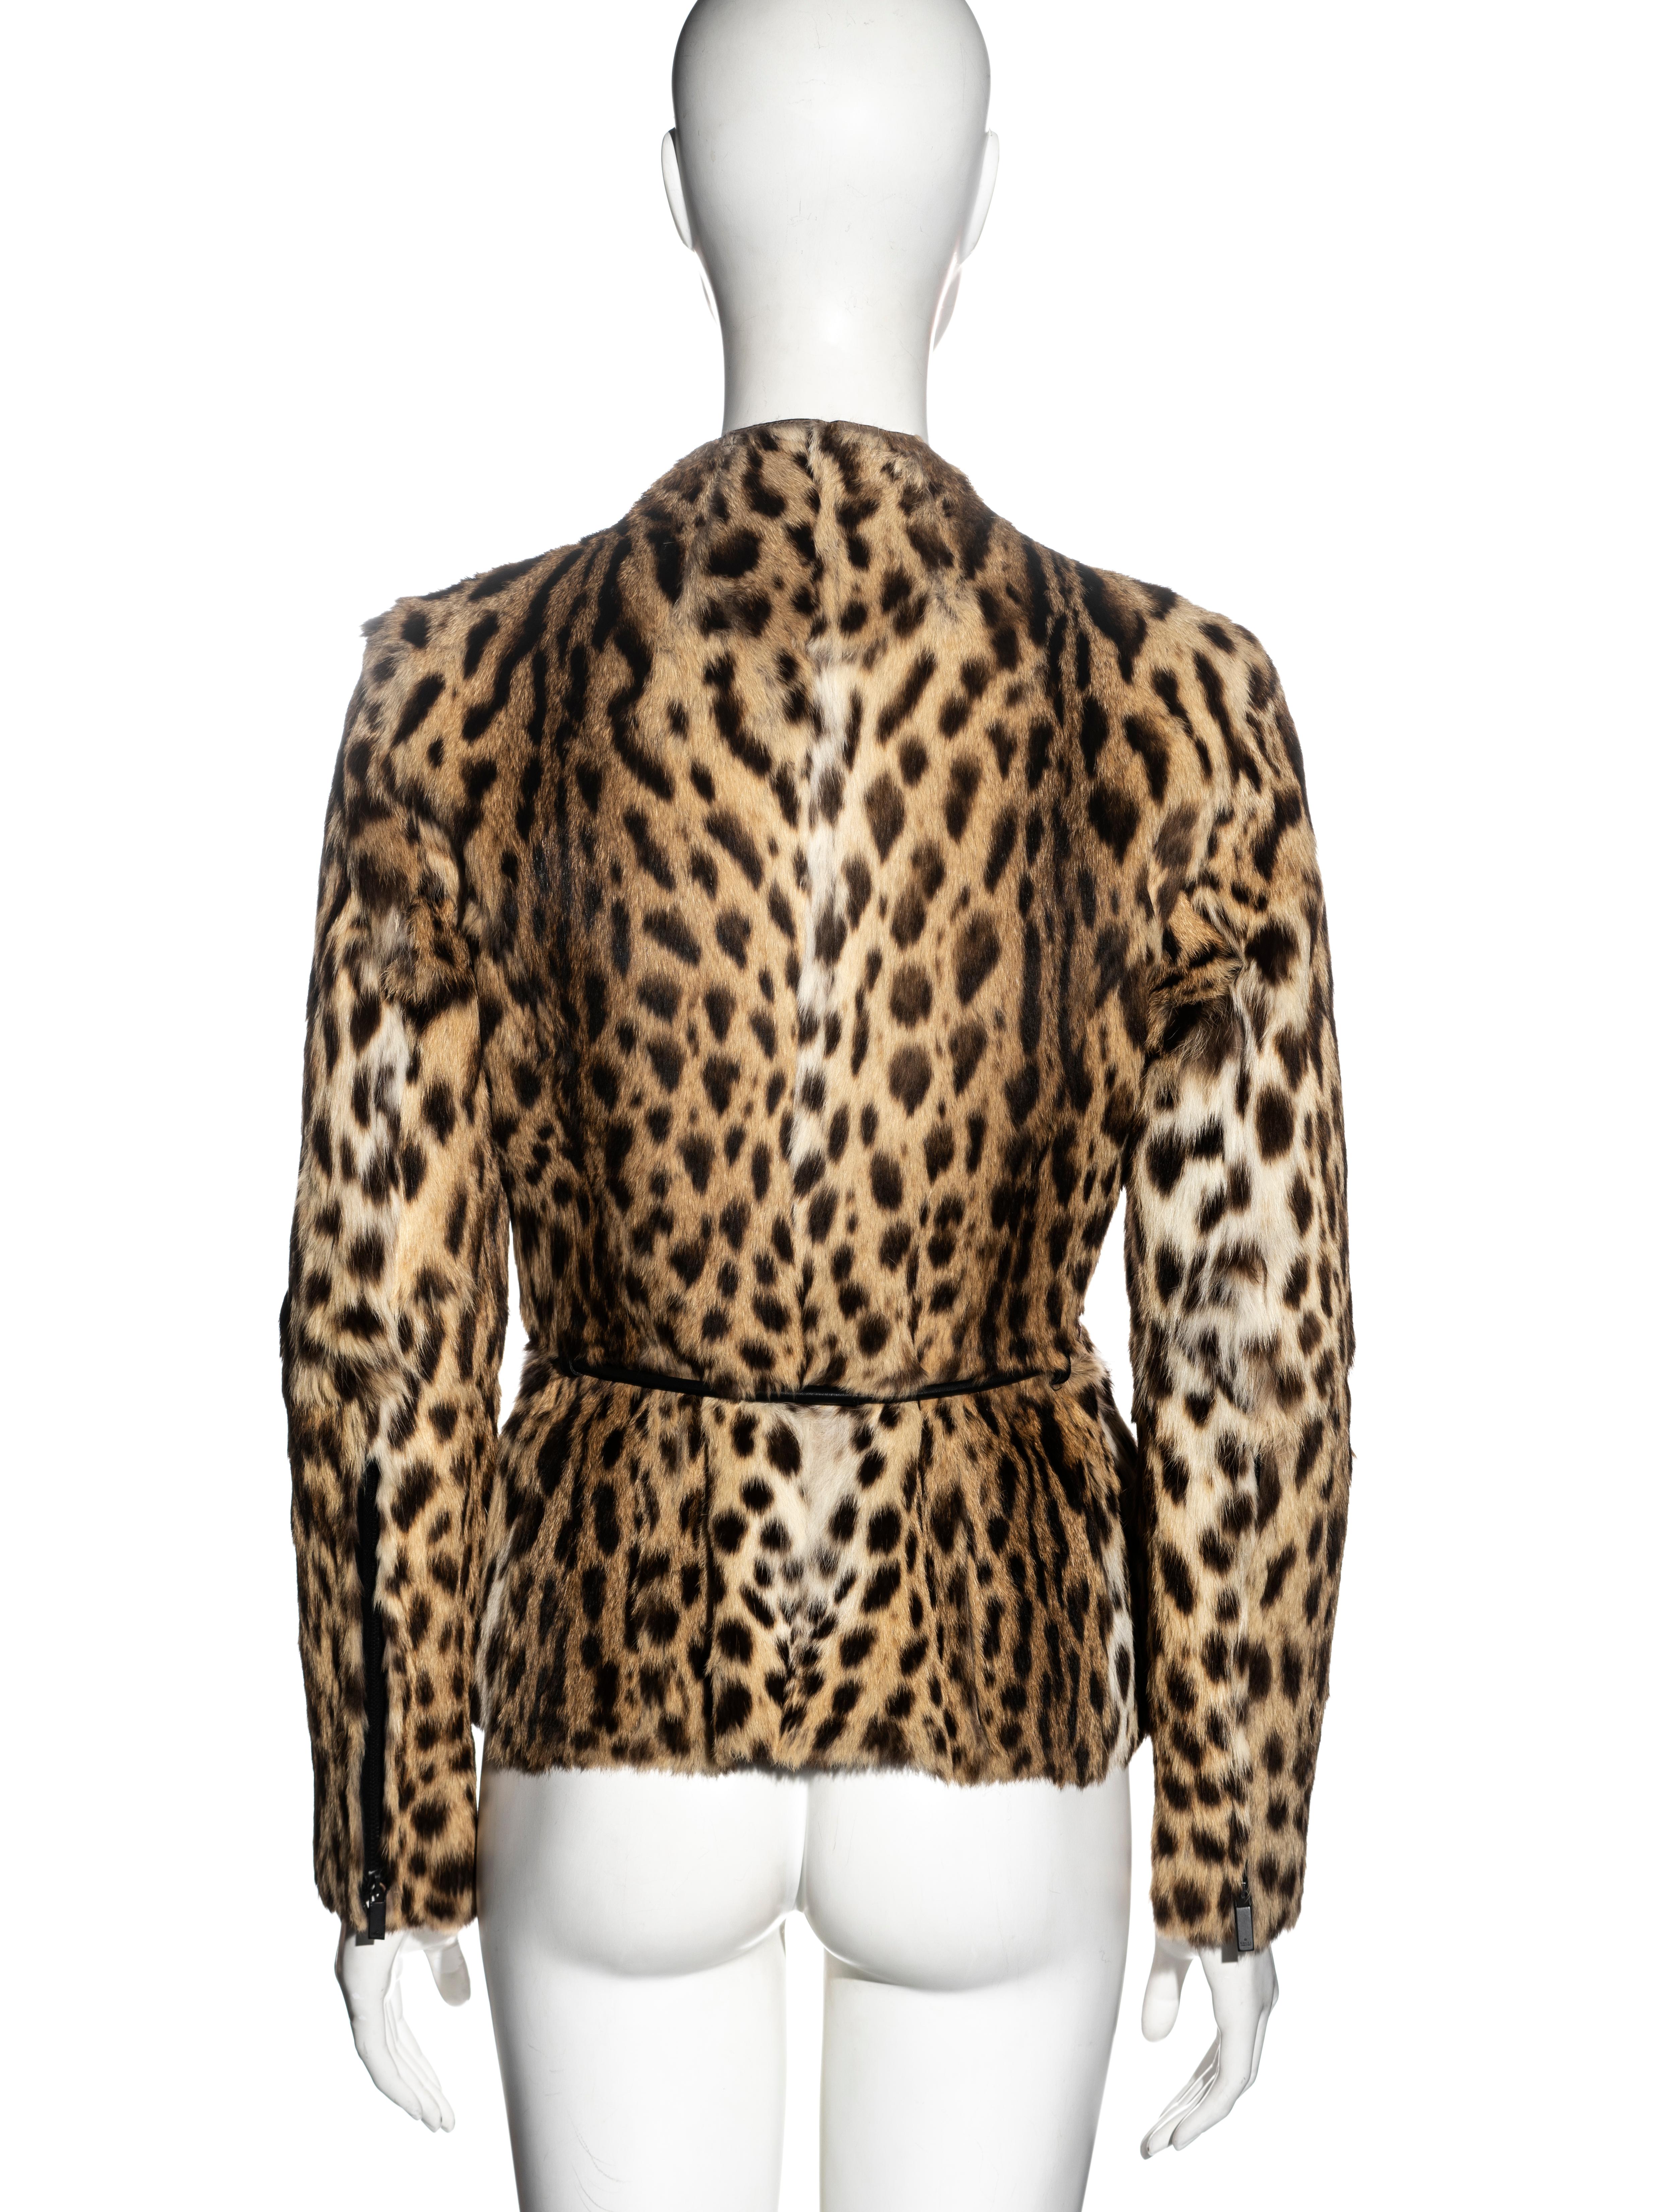 Gucci by Tom Ford leopard print rabbit fur jacket, fw 1999 For Sale 1